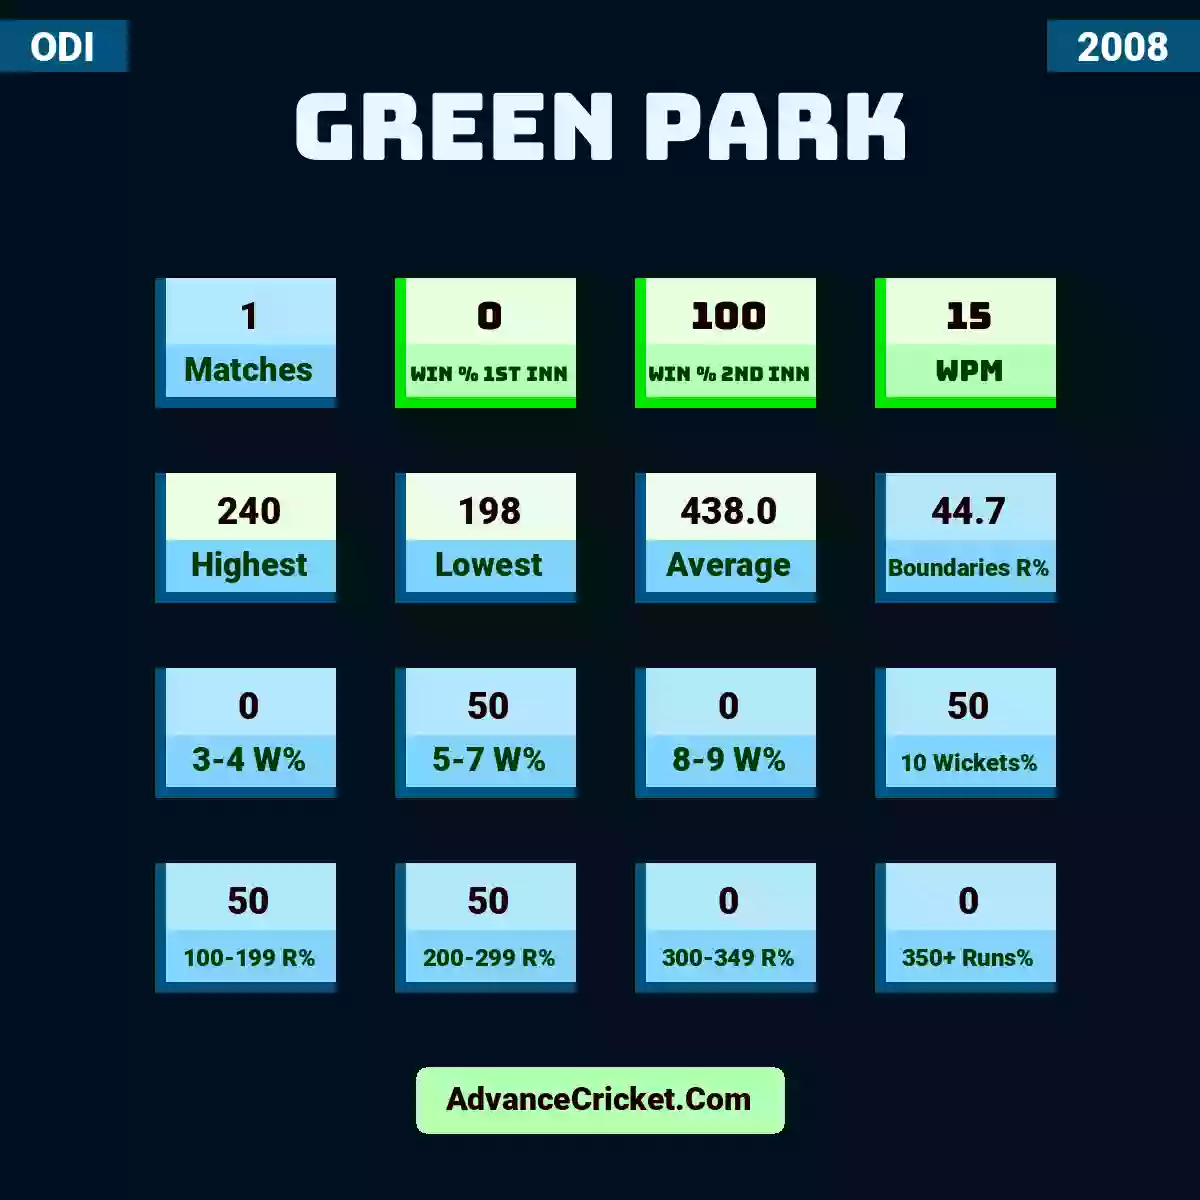 Image showing Green Park with Matches: 1, Win % 1st Inn: 0, Win % 2nd Inn: 100, WPM: 15, Highest: 240, Lowest: 198, Average: 438.0, Boundaries R%: 44.7, 3-4 W%: 0, 5-7 W%: 50, 8-9 W%: 0, 10 Wickets%: 50, 100-199 R%: 50, 200-299 R%: 50, 300-349 R%: 0, 350+ Runs%: 0.